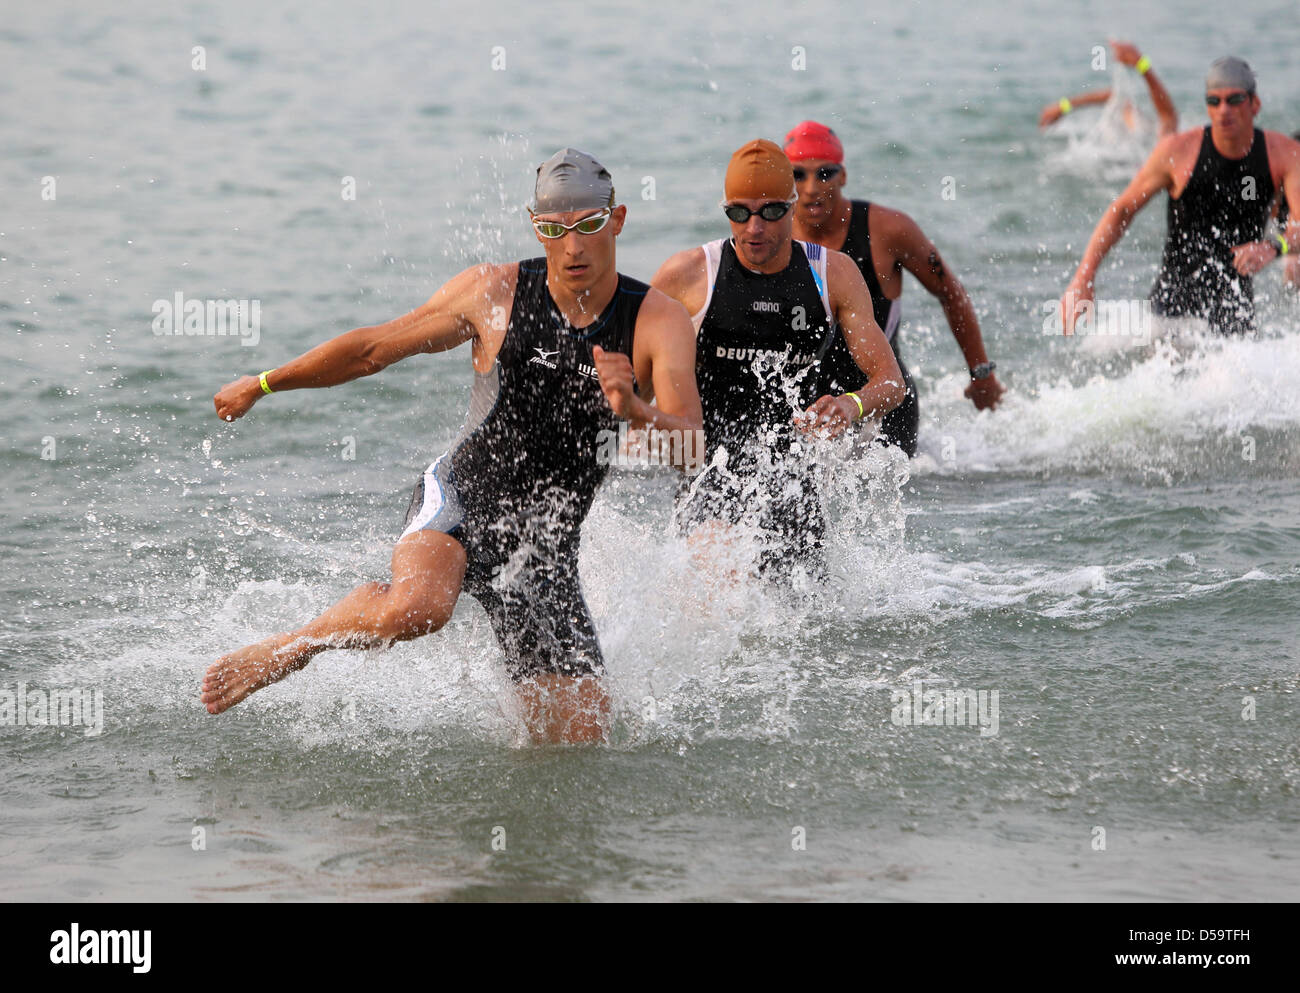 German triathletes Carsten Ritter and Andreas Raeltert rush out of the water during a swimming passage of the Ironman Europe in Frankfurt, Germany on 4. July 2010. More than 2300 triathletes from 55 nations take part in the turnament, which includes 3,8km of swimming, 180km of cycling and a concluding 42,2 km long marathon. Photo: Thomas Frey dpa/Ihe Stock Photo